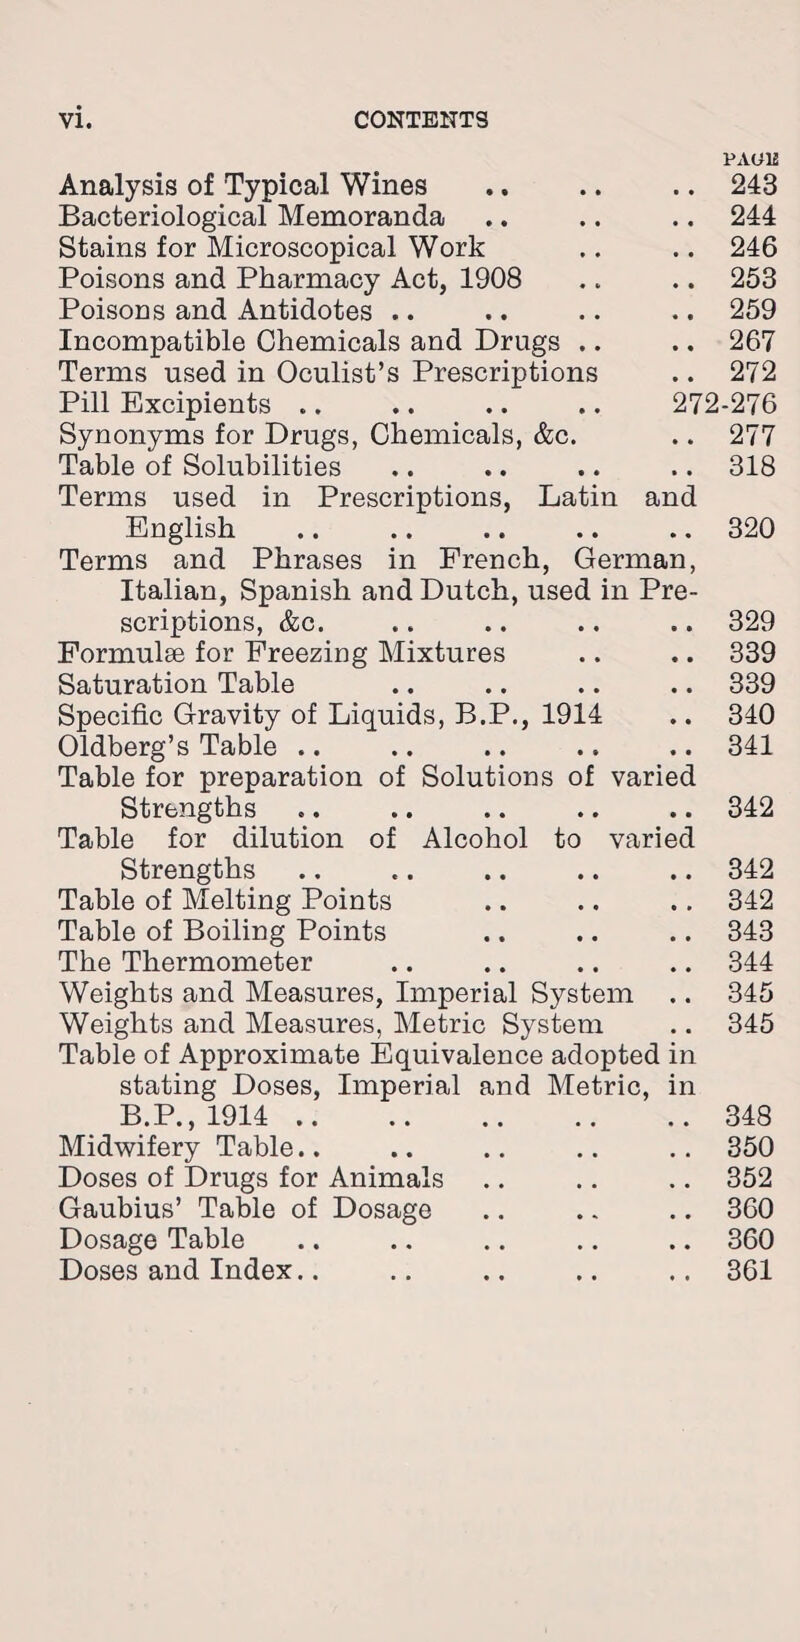 Analysis of Typical Wines • • PAOli .. 243 Bacteriological Memoranda • • .. 244 Stains for Microscopical Work * • .. 246 Poisons and Pharmacy Act, 1908 • V .. 253 Poisons and Antidotes .. • • .. 259 Incompatible Chemicals and Drugs .. .. 267 Terms used in Oculist’s Prescriptions .. 272 Pill Excipients .. • • 272-276 Synonyms for Drugs, Chemicals, &C. .. 277 Table of Solubilities • • .. 318 Terms used in Prescriptions, Latin and English • • .. 320 Terms and Phrases in French, German, Italian, Spanish and Dutch, used in Pre¬ scriptions, &c. .. .. .. .. 329 Formulae for Freezing Mixtures .. .. 339 Saturation Table .. .. .. .. 339 Specific Gravity of Liquids, B.P., 1914 .. 340 Oldberg’s Table .. .. .. .. .. 341 Table for preparation of Solutions of varied Strengths .. .. .. .. .. 342 Table for dilution of Alcohol to varied Strengths .. .. .. .. .. 342 Table of Melting Points .. .. .. 342 Table of Boiling Points .. .. .. 343 The Thermometer .. .. .. .. 344 Weights and Measures, Imperial System .. 345 Weights and Measures, Metric System .. 345 Table of Approximate Equivalence adopted in stating Doses, Imperial and Metric, in B.P.,1914.348 Midwifery Table.. .. .. .. .. 350 Doses of Drugs for Animals .. .. .. 352 Gaubius’ Table of Dosage .. .. .. 360 Dosage Table .. .. .. .. .. 360 Doses and Index.. .. .. .. .. 361